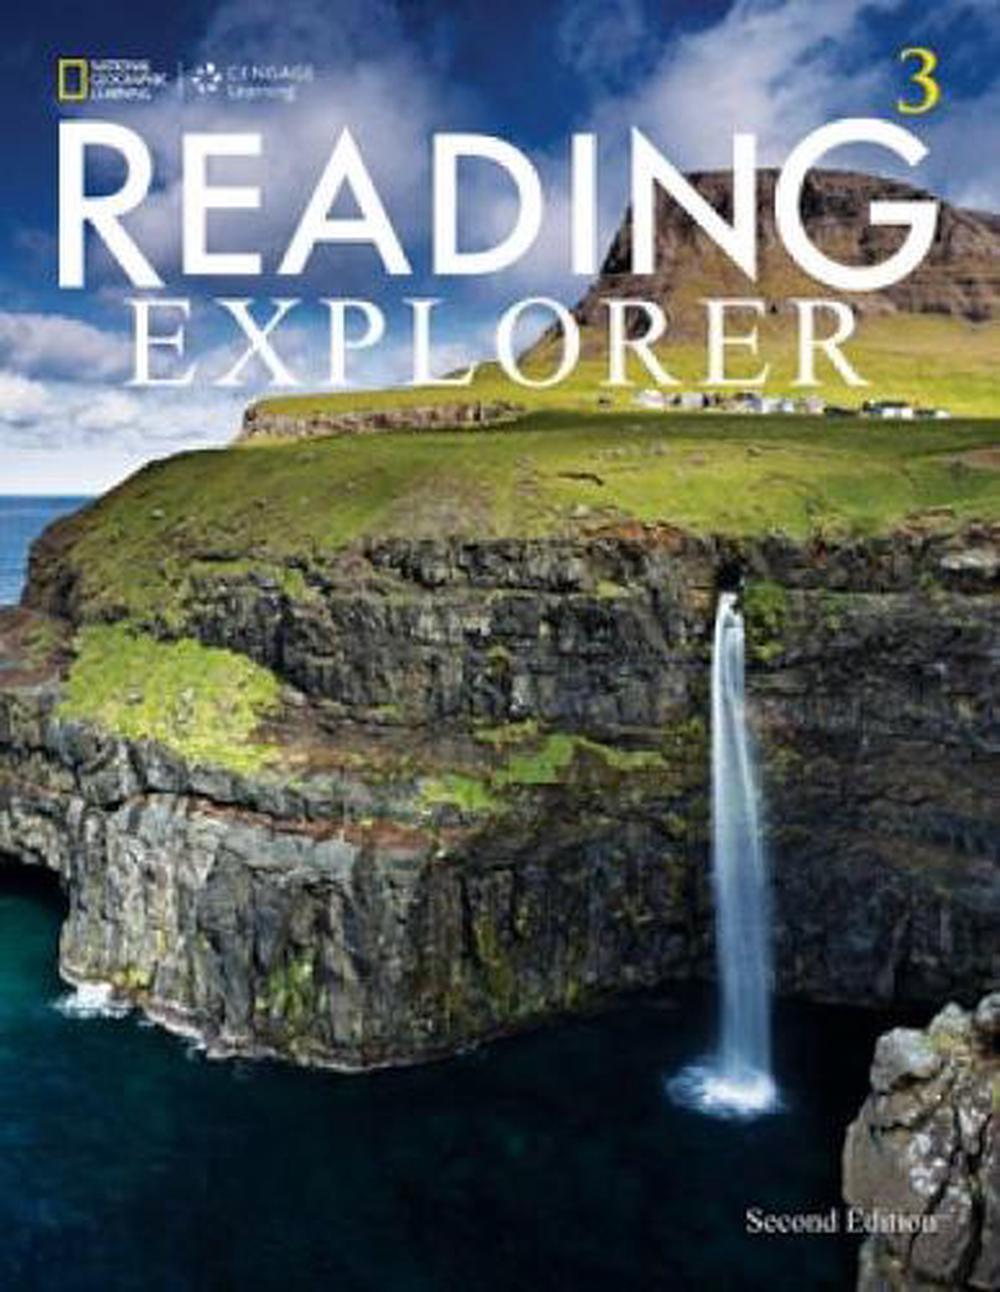 Reading　by　The　Nancy　Douglas,　Book　Merchandise,　at　Explorer　online　Buy　Nile　with　Workbook　Online　9781305254480